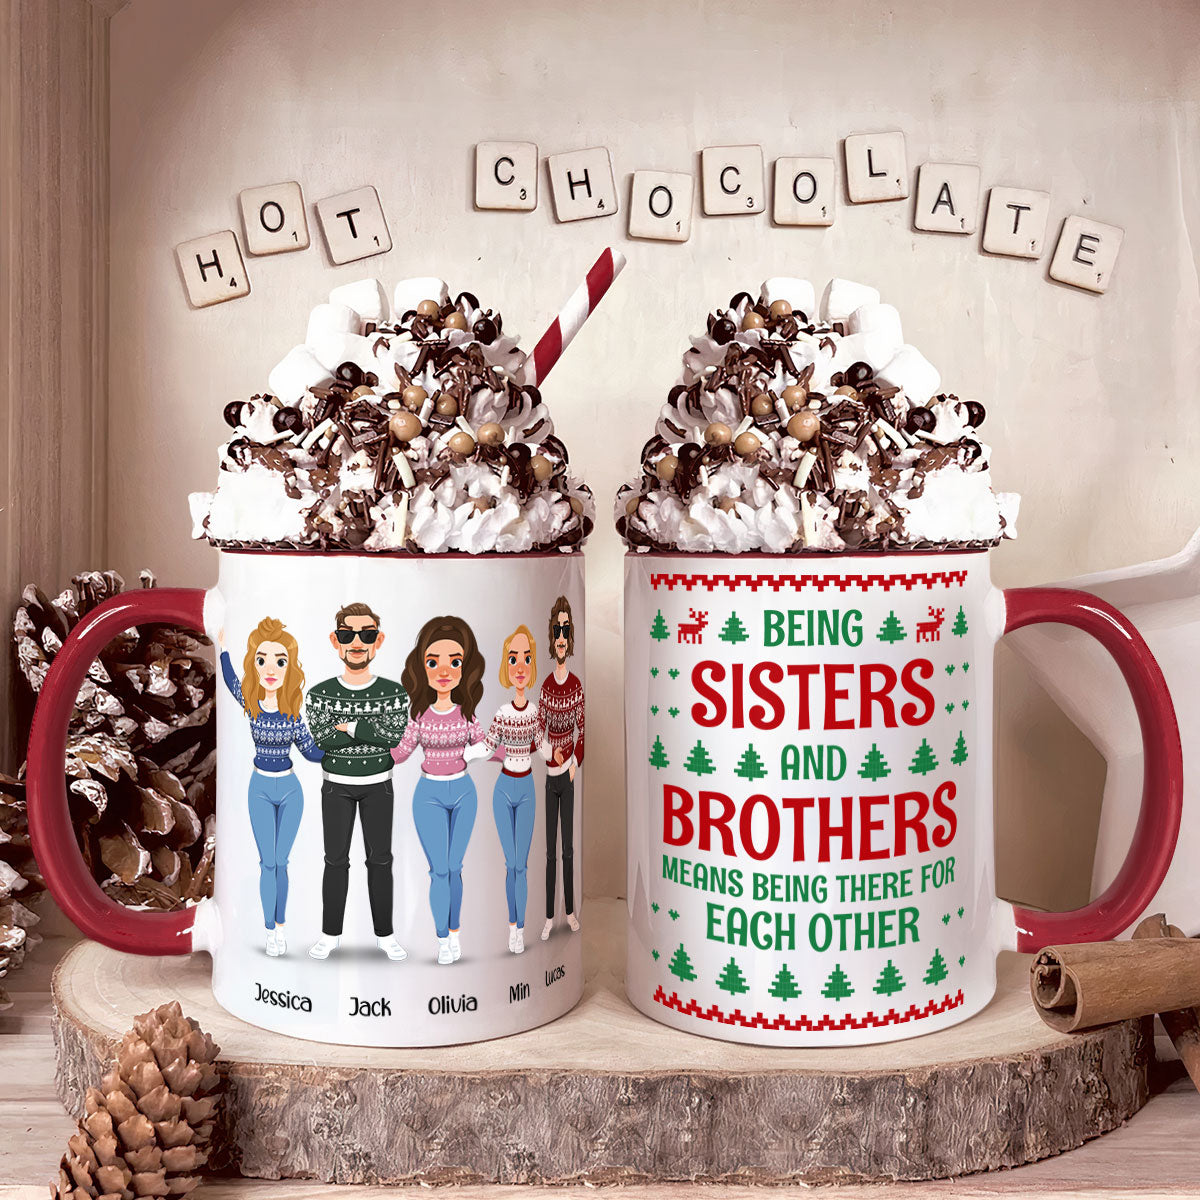 Being Siblings Means Being There For Each Other - Personalized Accent Mug